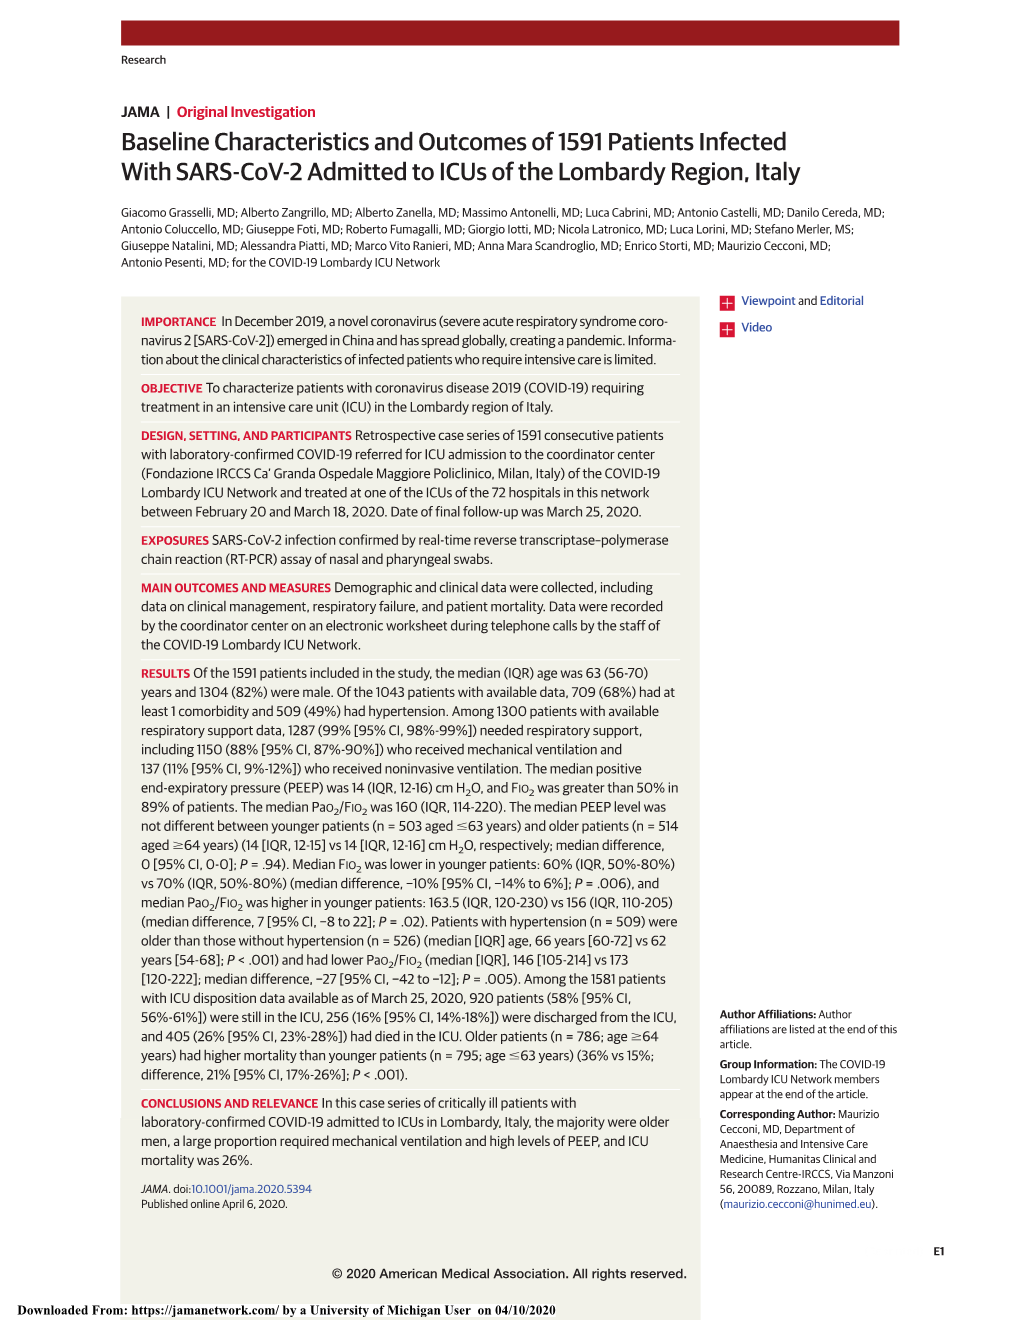 Baseline Characteristics and Outcomes of 1591 Patients Infected with SARS-Cov-2 Admitted to Icus of the Lombardy Region, Italy